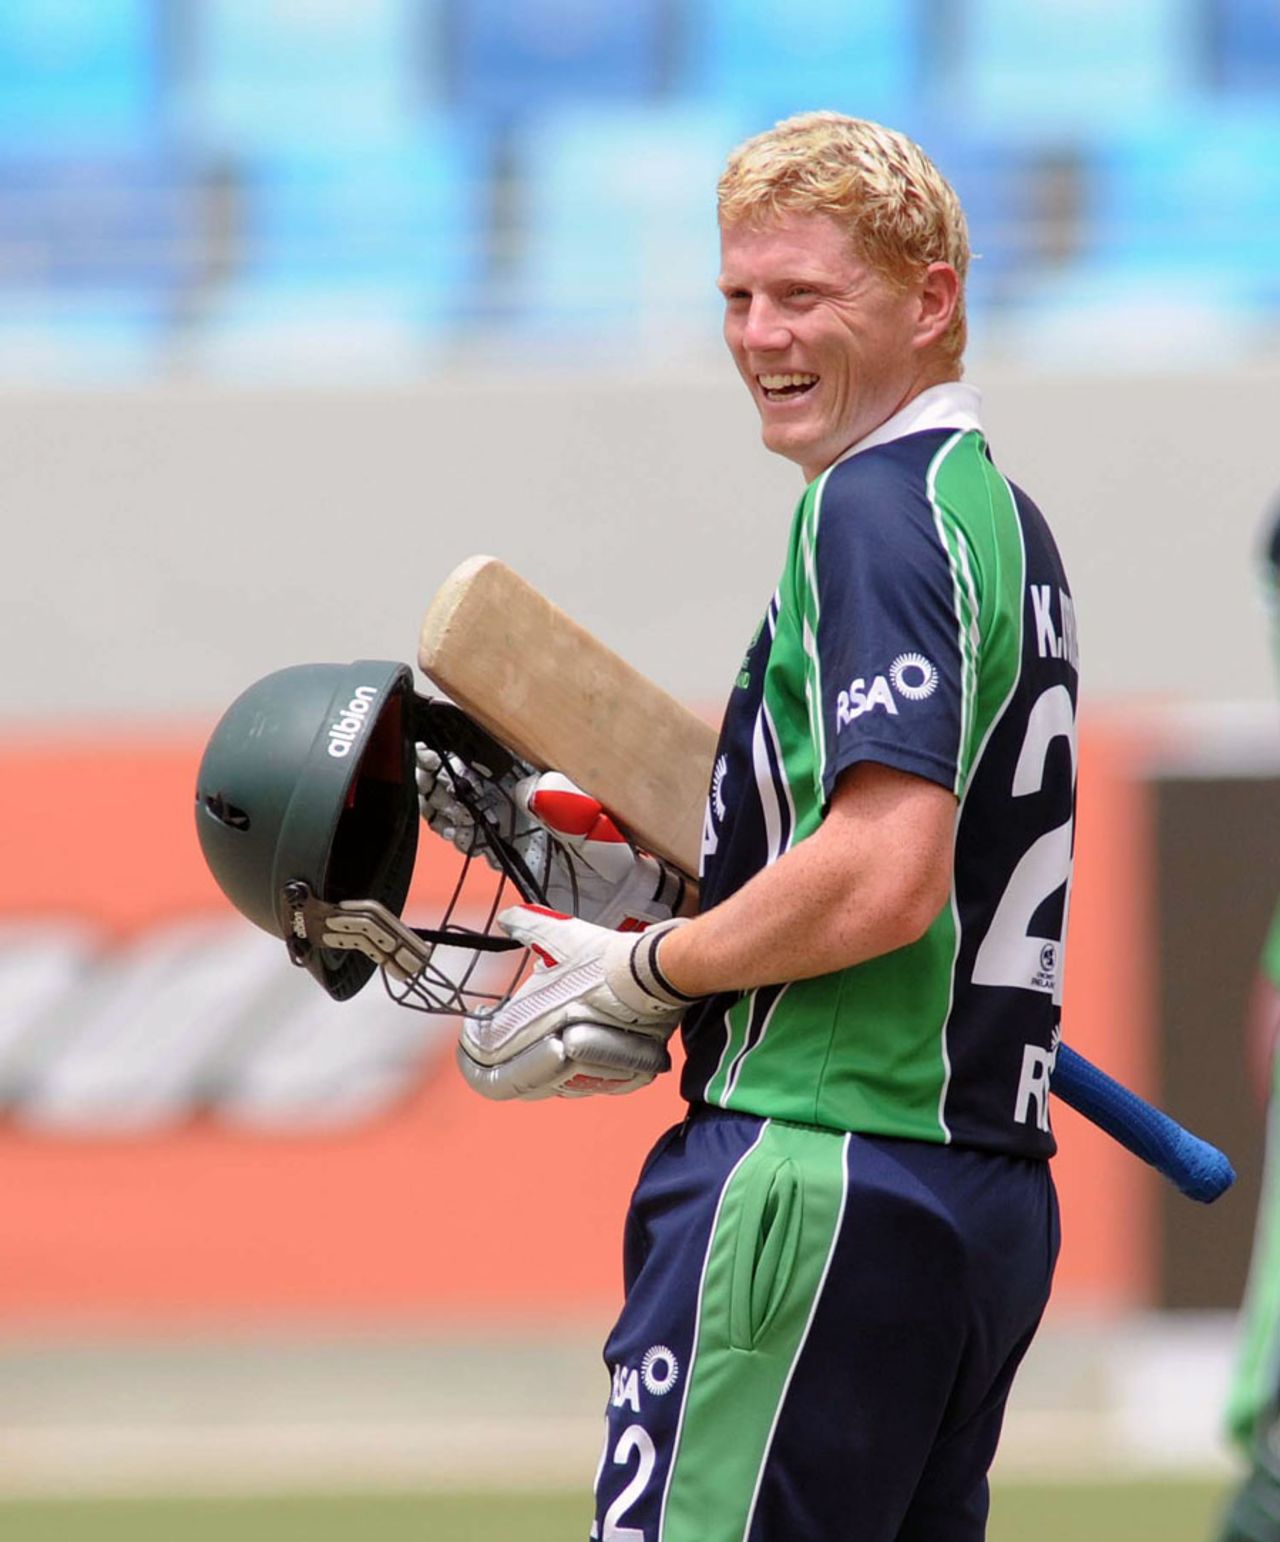 Kevin O'Brien steered his side home with a quick 30, Ireland v Netherlands, ICC World Twenty20 Qualifier, preliminary final, Dubai, March 23, 2012